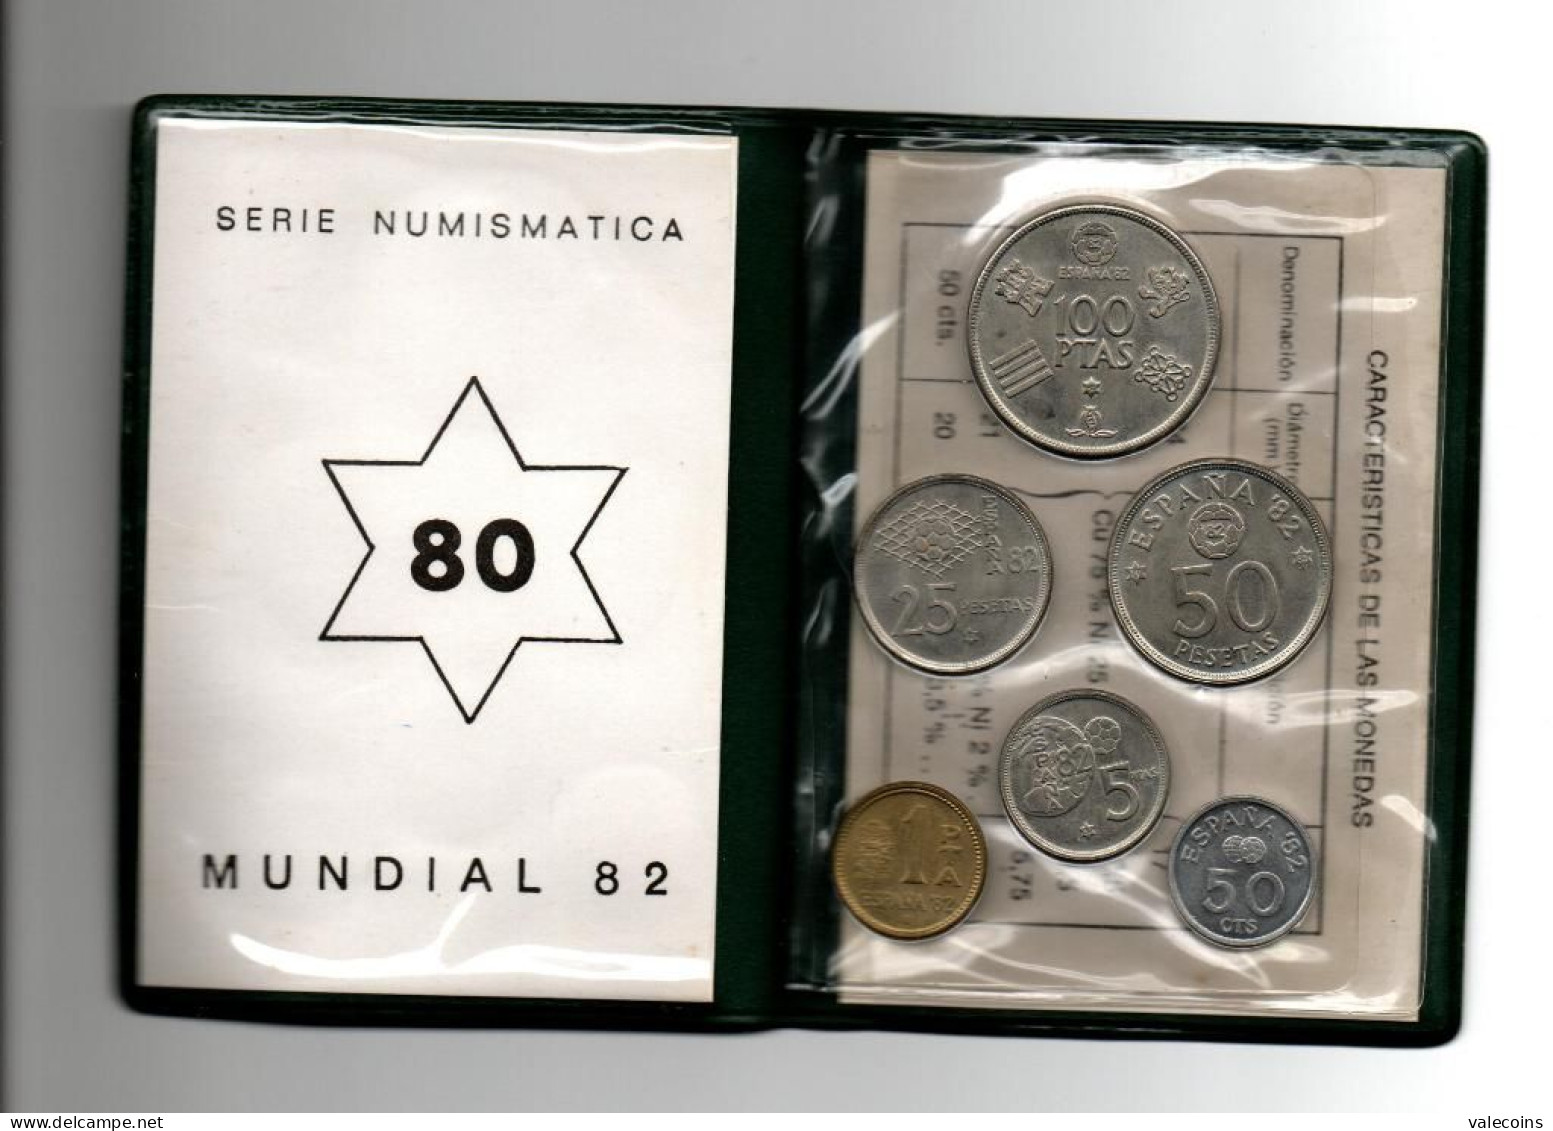 Spagna España Spain - 1982 - 6 COINS - Football Soccer Mundial Mondiale - KMS OFFICIAL ISSUE - LIMITED ISSUE - Sets Sin Usar &  Sets De Prueba